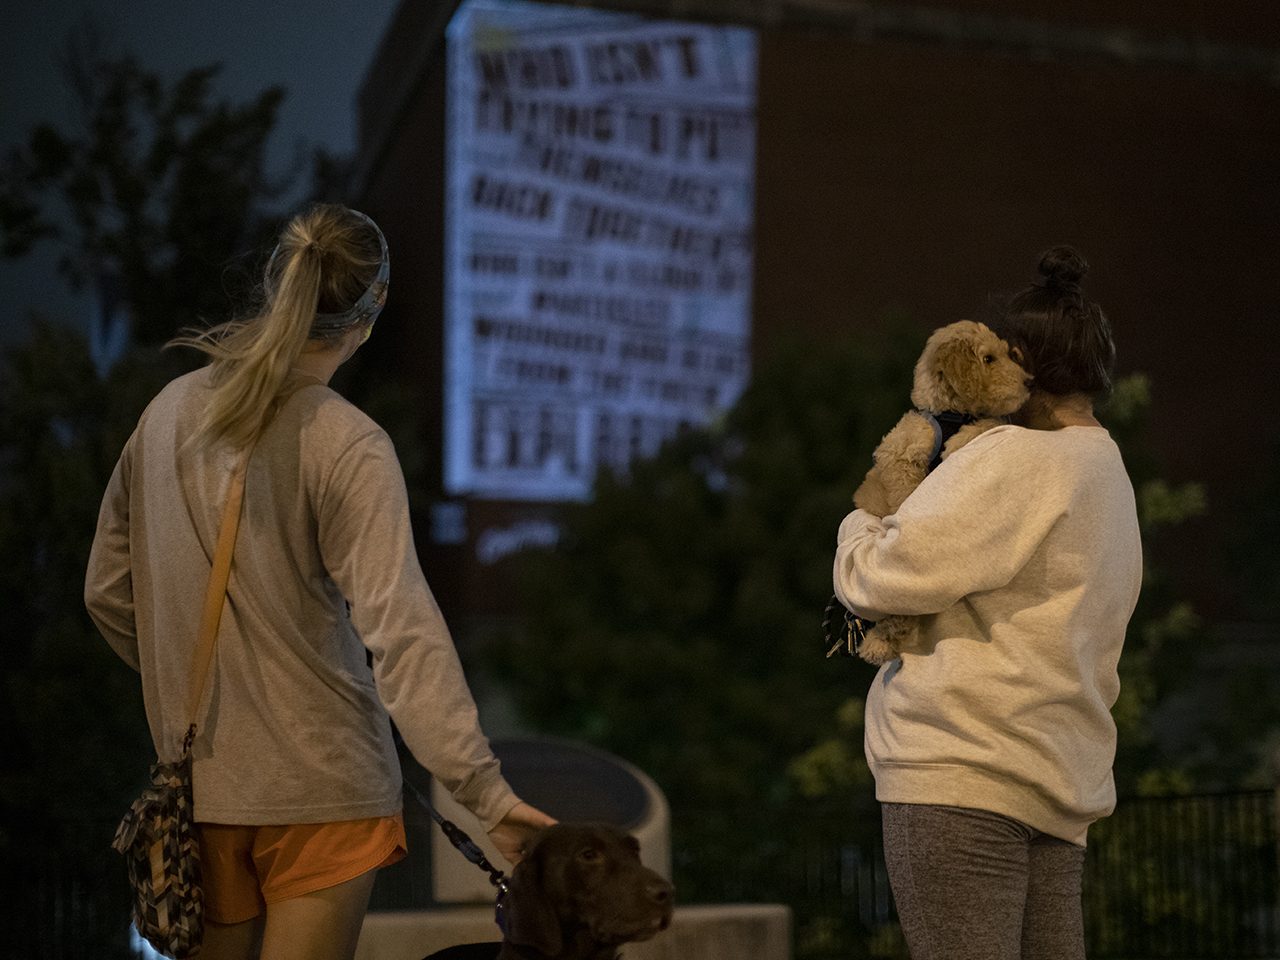 two women with dogs looking at projections on side of building